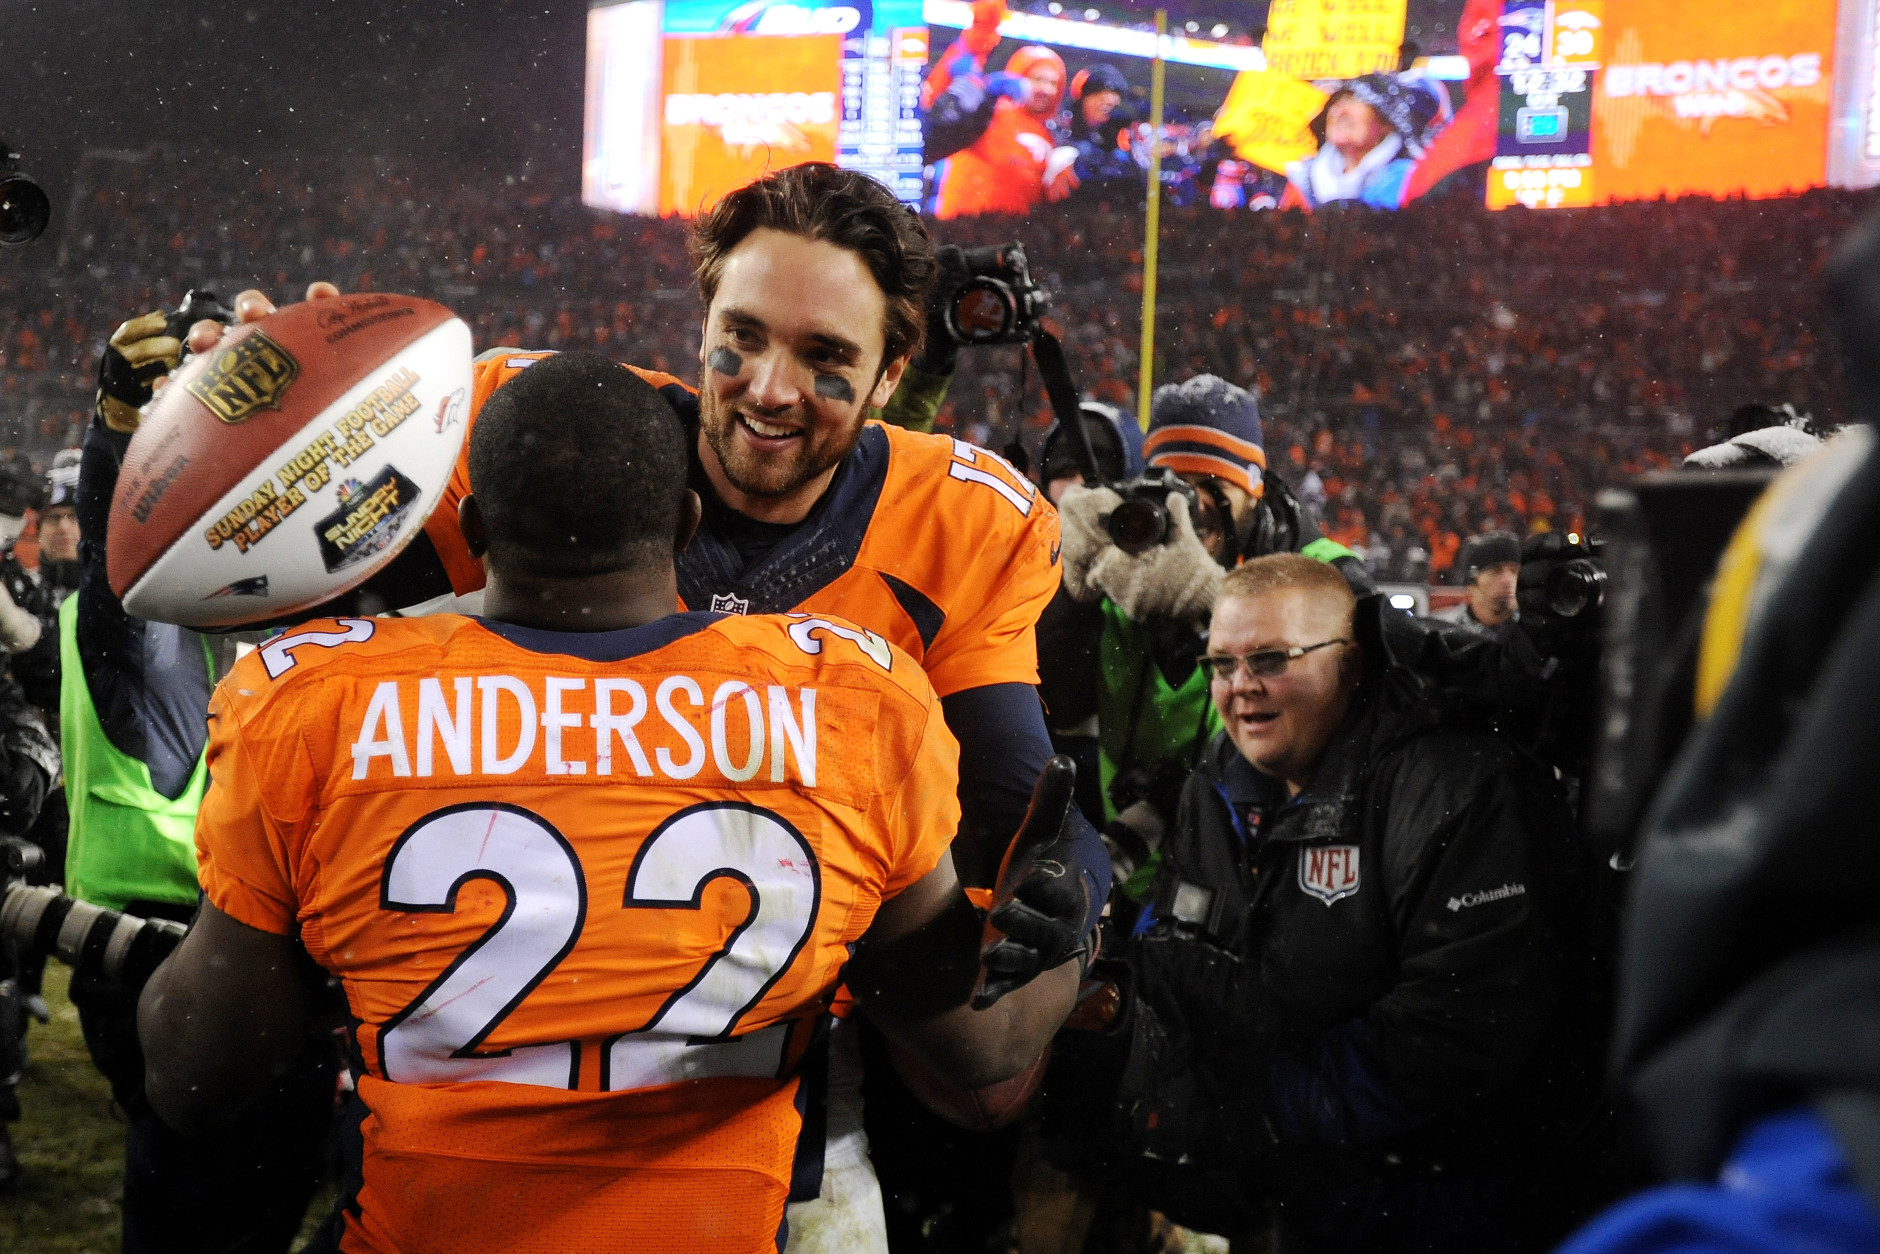 DENVER, CO - NOVEMBER 29: Quarterback Brock Osweiler #17 of the Denver Broncos celebrates with running back C.J. Anderson #22 of the Denver Broncos after defeating the New England Patriots 30-24 in overtime at Sports Authority Field at Mile High on November 29, 2015 in Denver, Colorado. (Photo by Dustin Bradford/Getty Images)